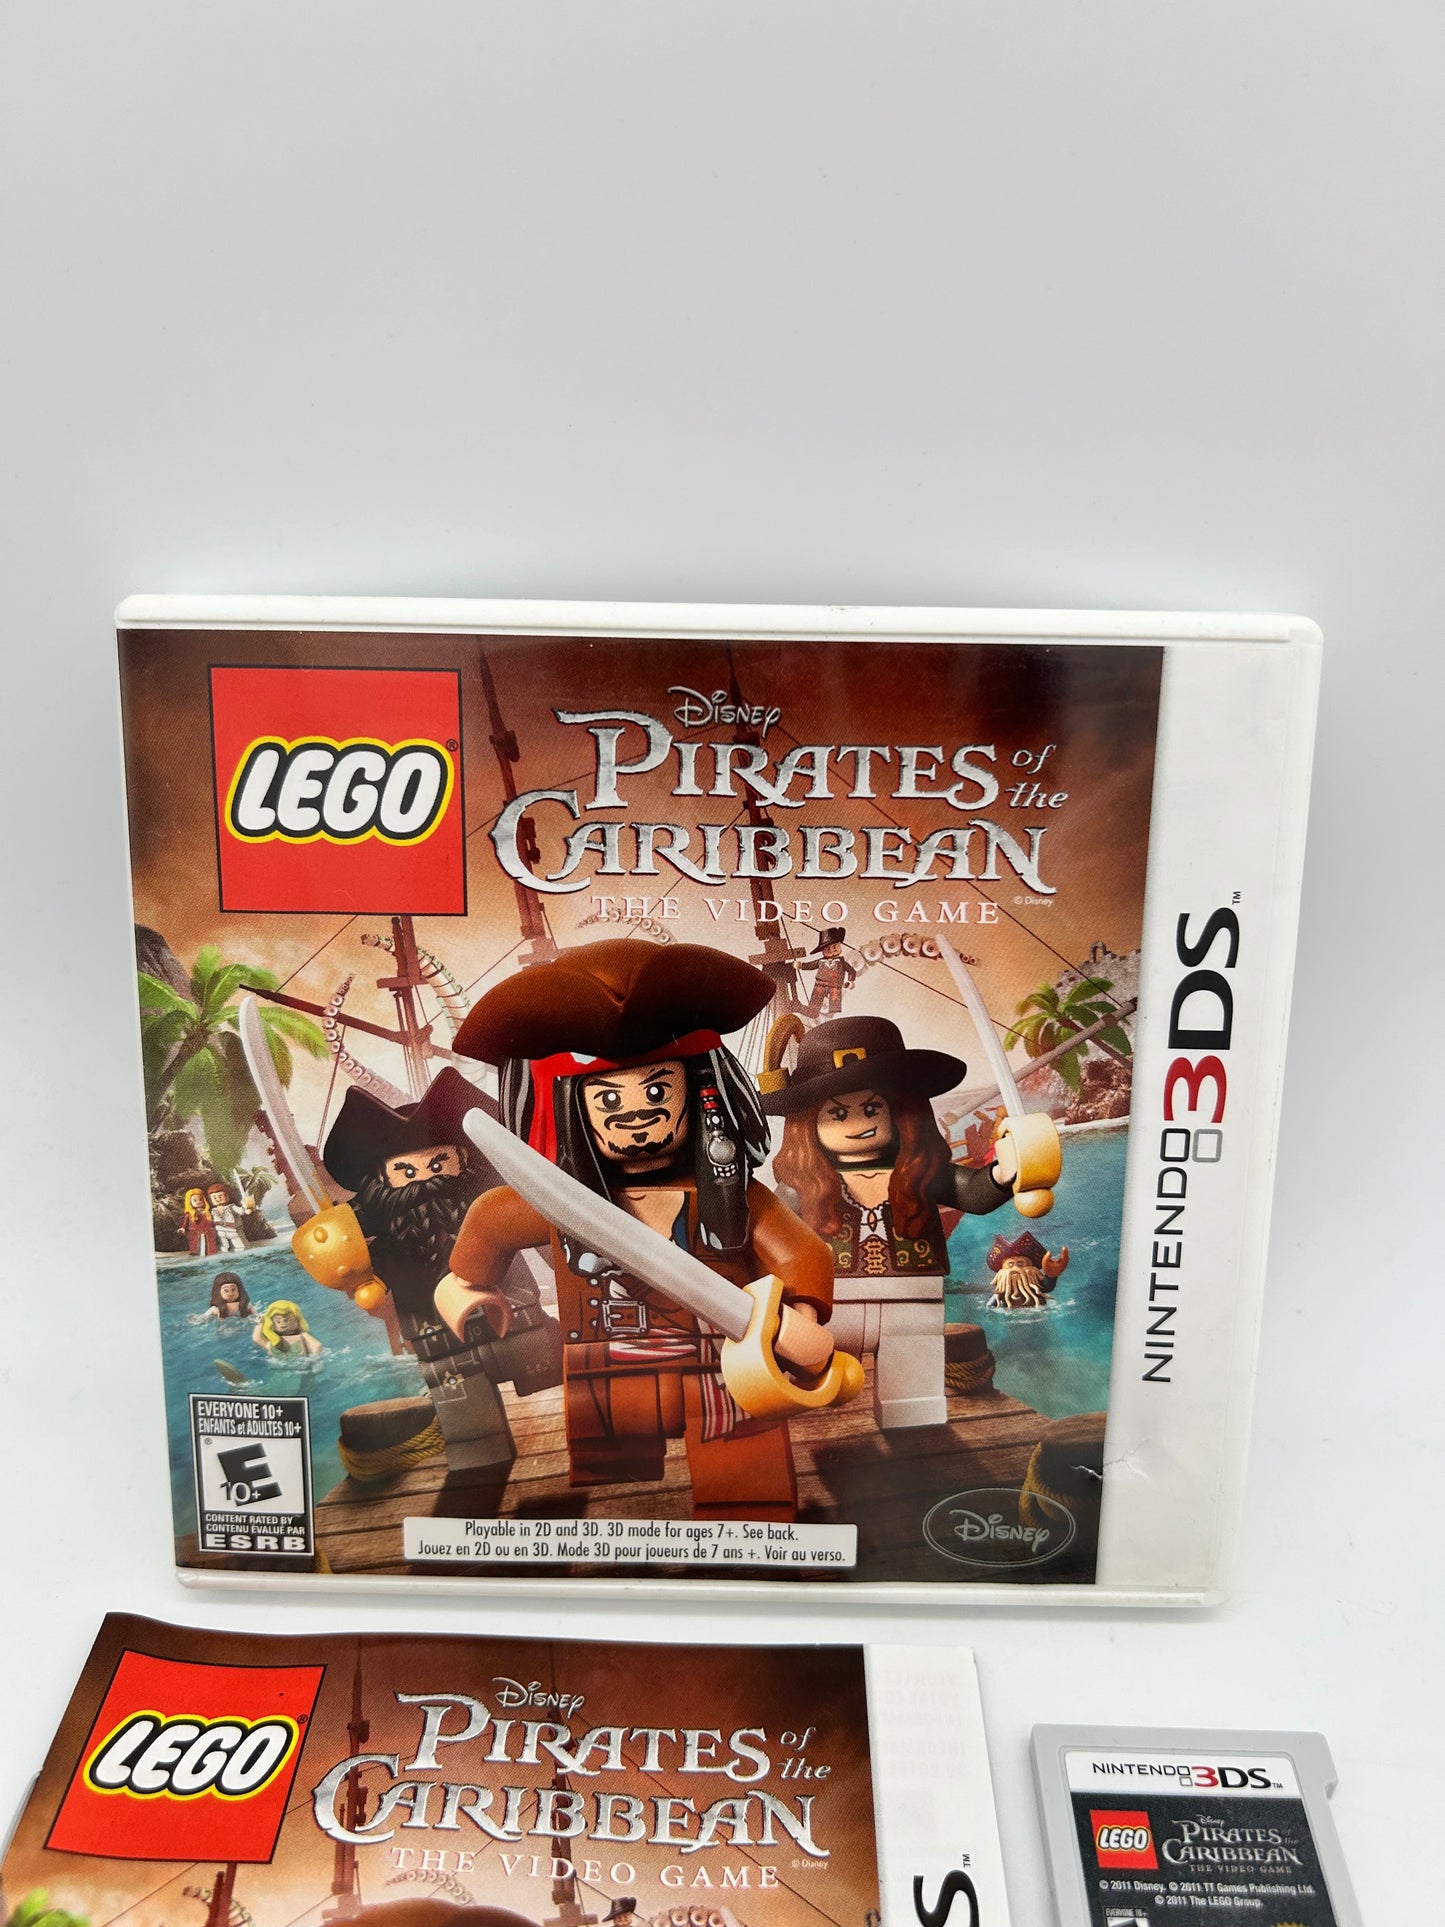 NiNTENDO 3DS | LEGO PiRATES OF THE CARiBBEAN THE ViDEO GAME